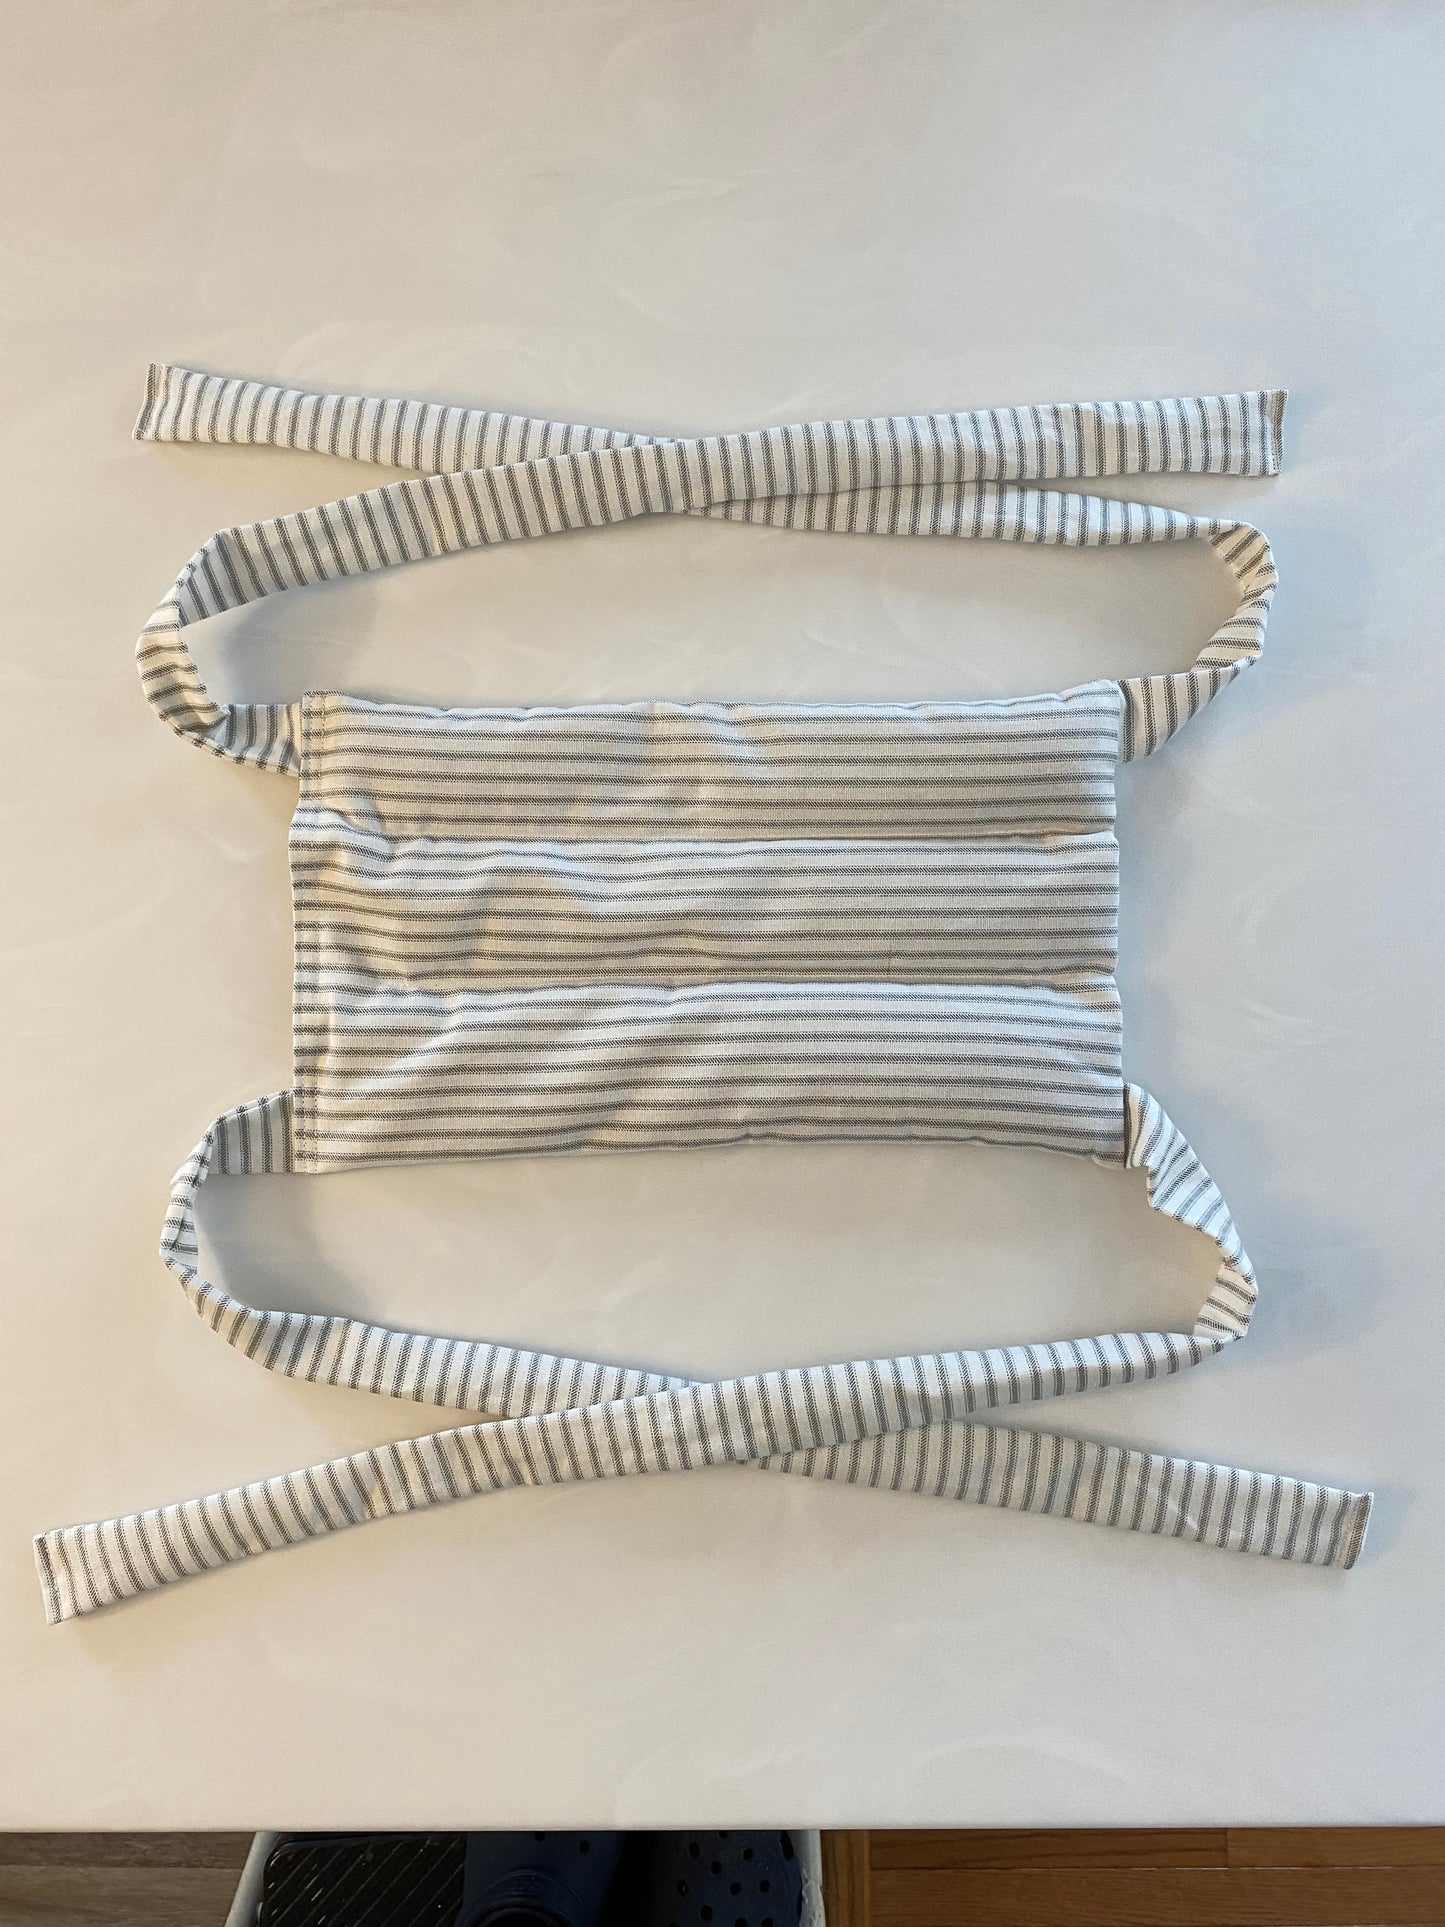 Grey Stripe Large Microwavable Rice Bag with Ties for Hands Free Use